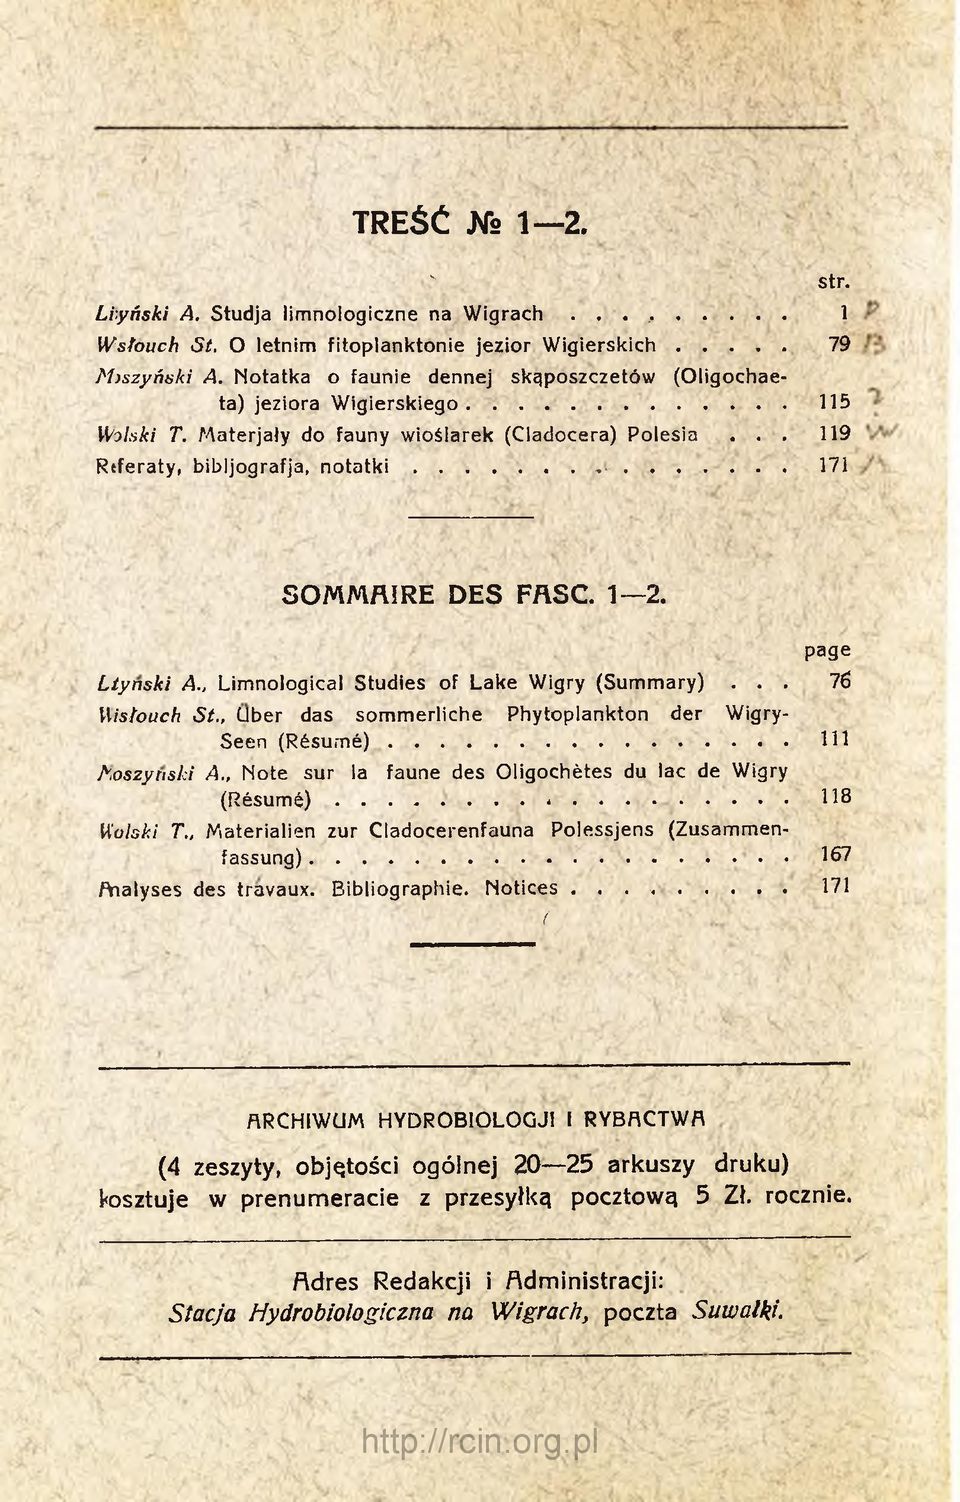 SOMMAIRE DES FASC. 1 2. page L tyn sk i A., Limnological Studies of Lake Wigry (Summary)... 76 Wistouch S t., über das sommerliche Phytoplankton der Wigry- Seen (R é s u m é )... I l l A oszytiski A.